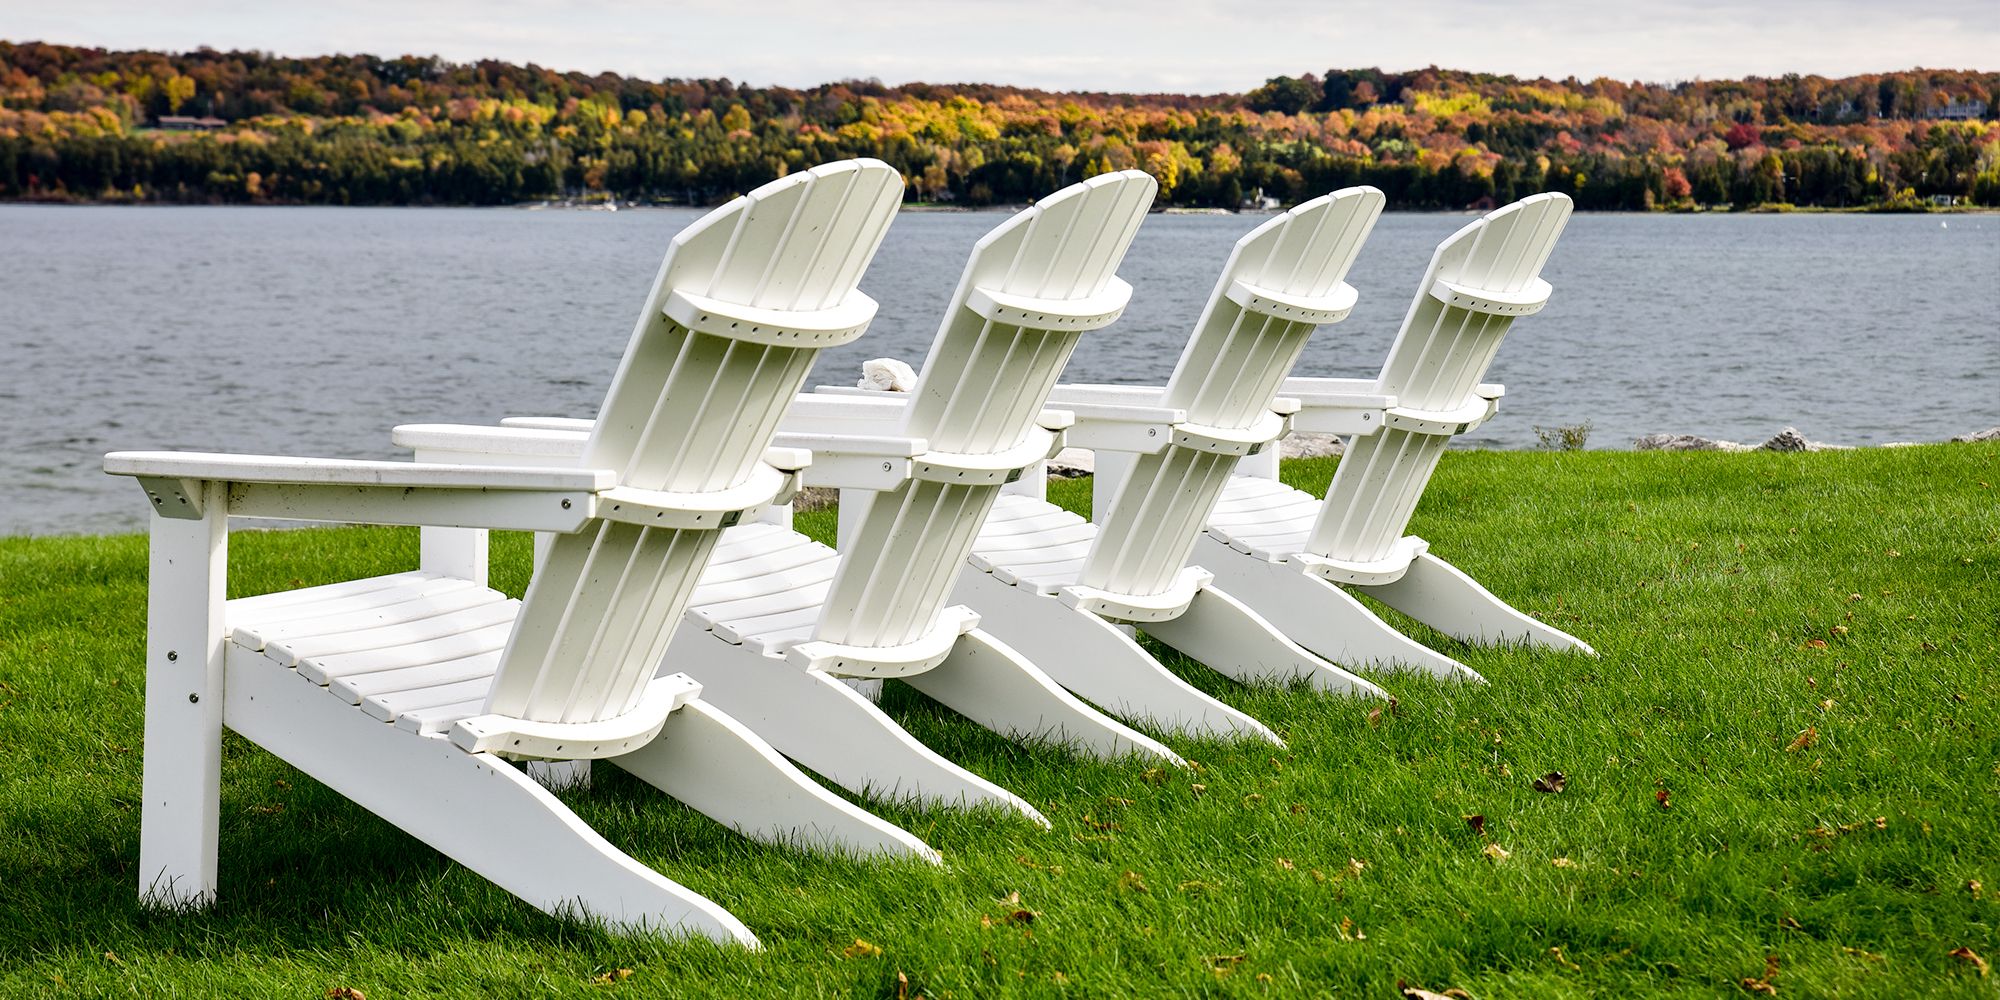 11 Best Adirondack Chairs For 2020 Adirondack Chair Sets For Yards